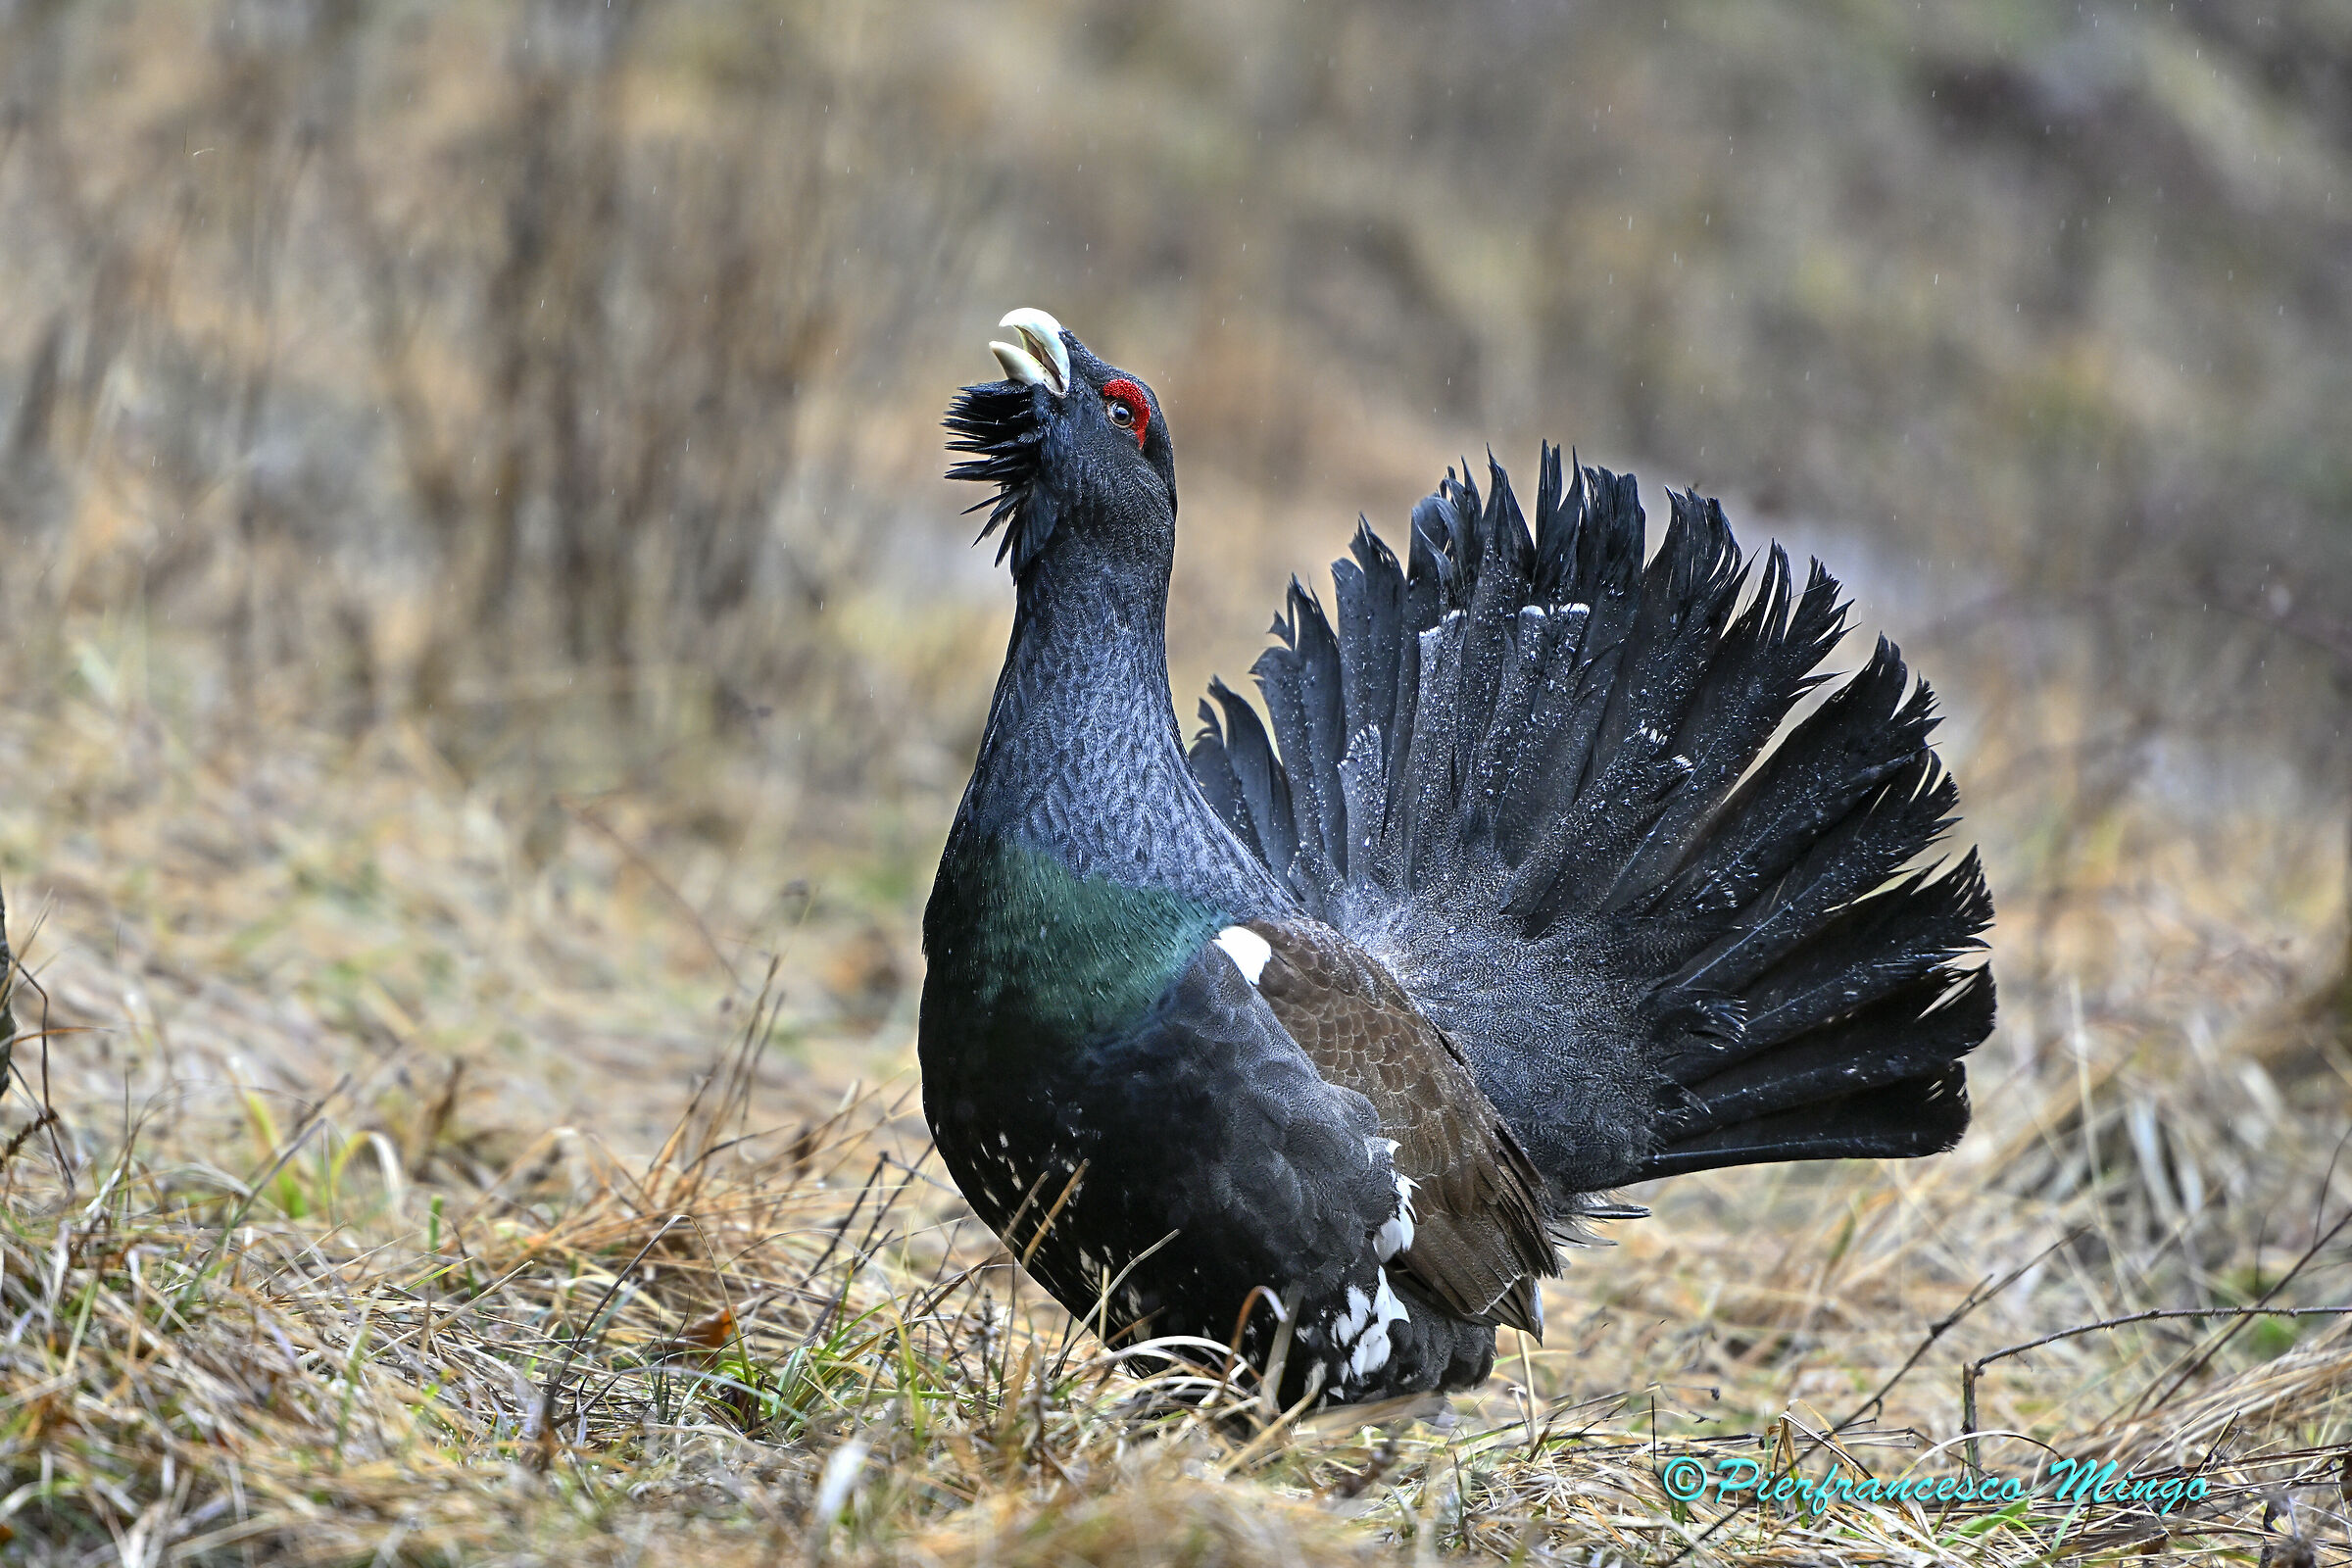 Discovering the capercaillie...